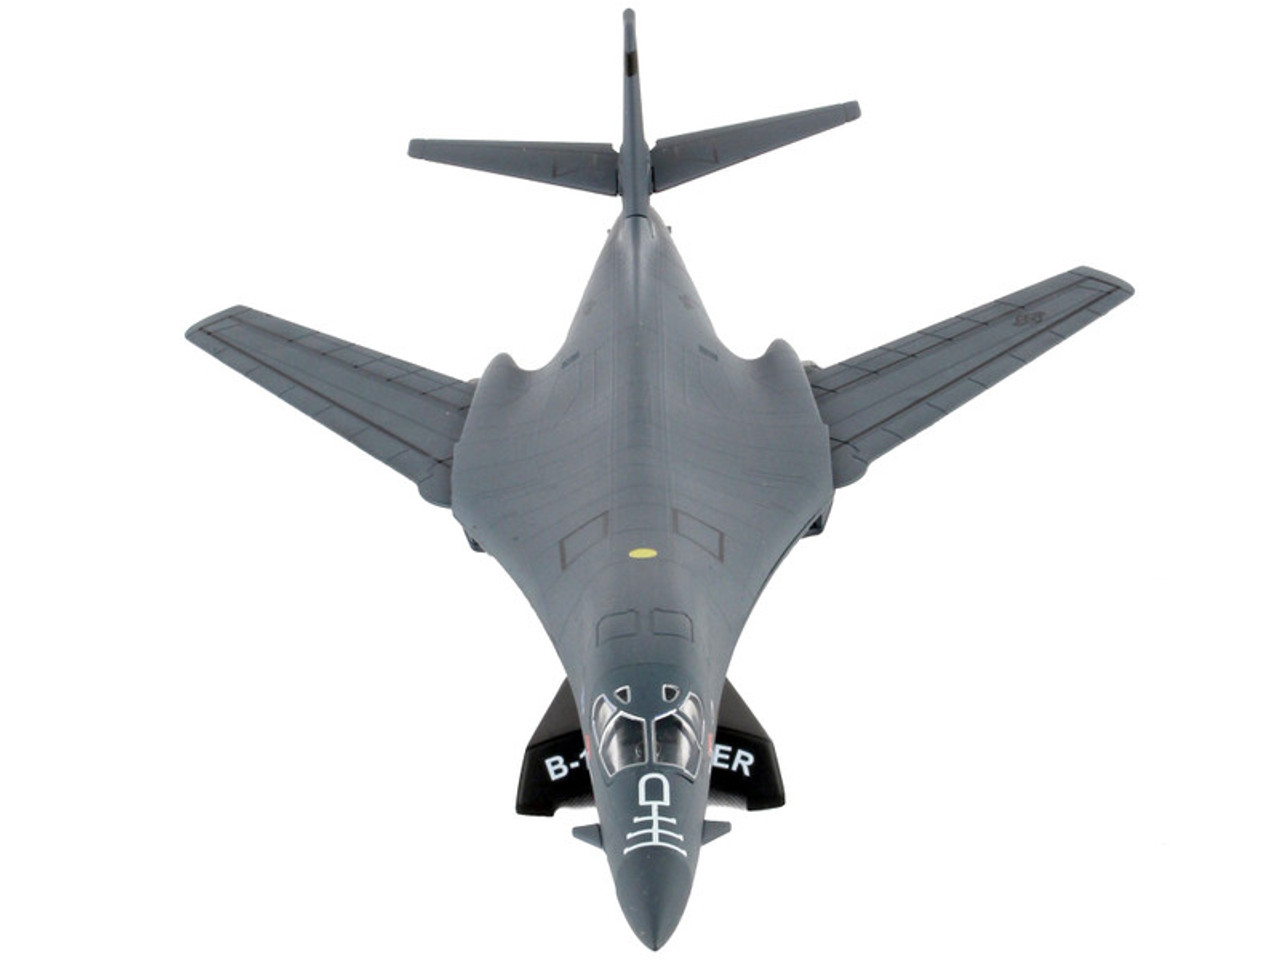 Rockwell International B-1B Lancer Bomber Aircraft "Boss Hawg" United States Air Force 1/221 Diecast Model Airplane by Postage Stamp